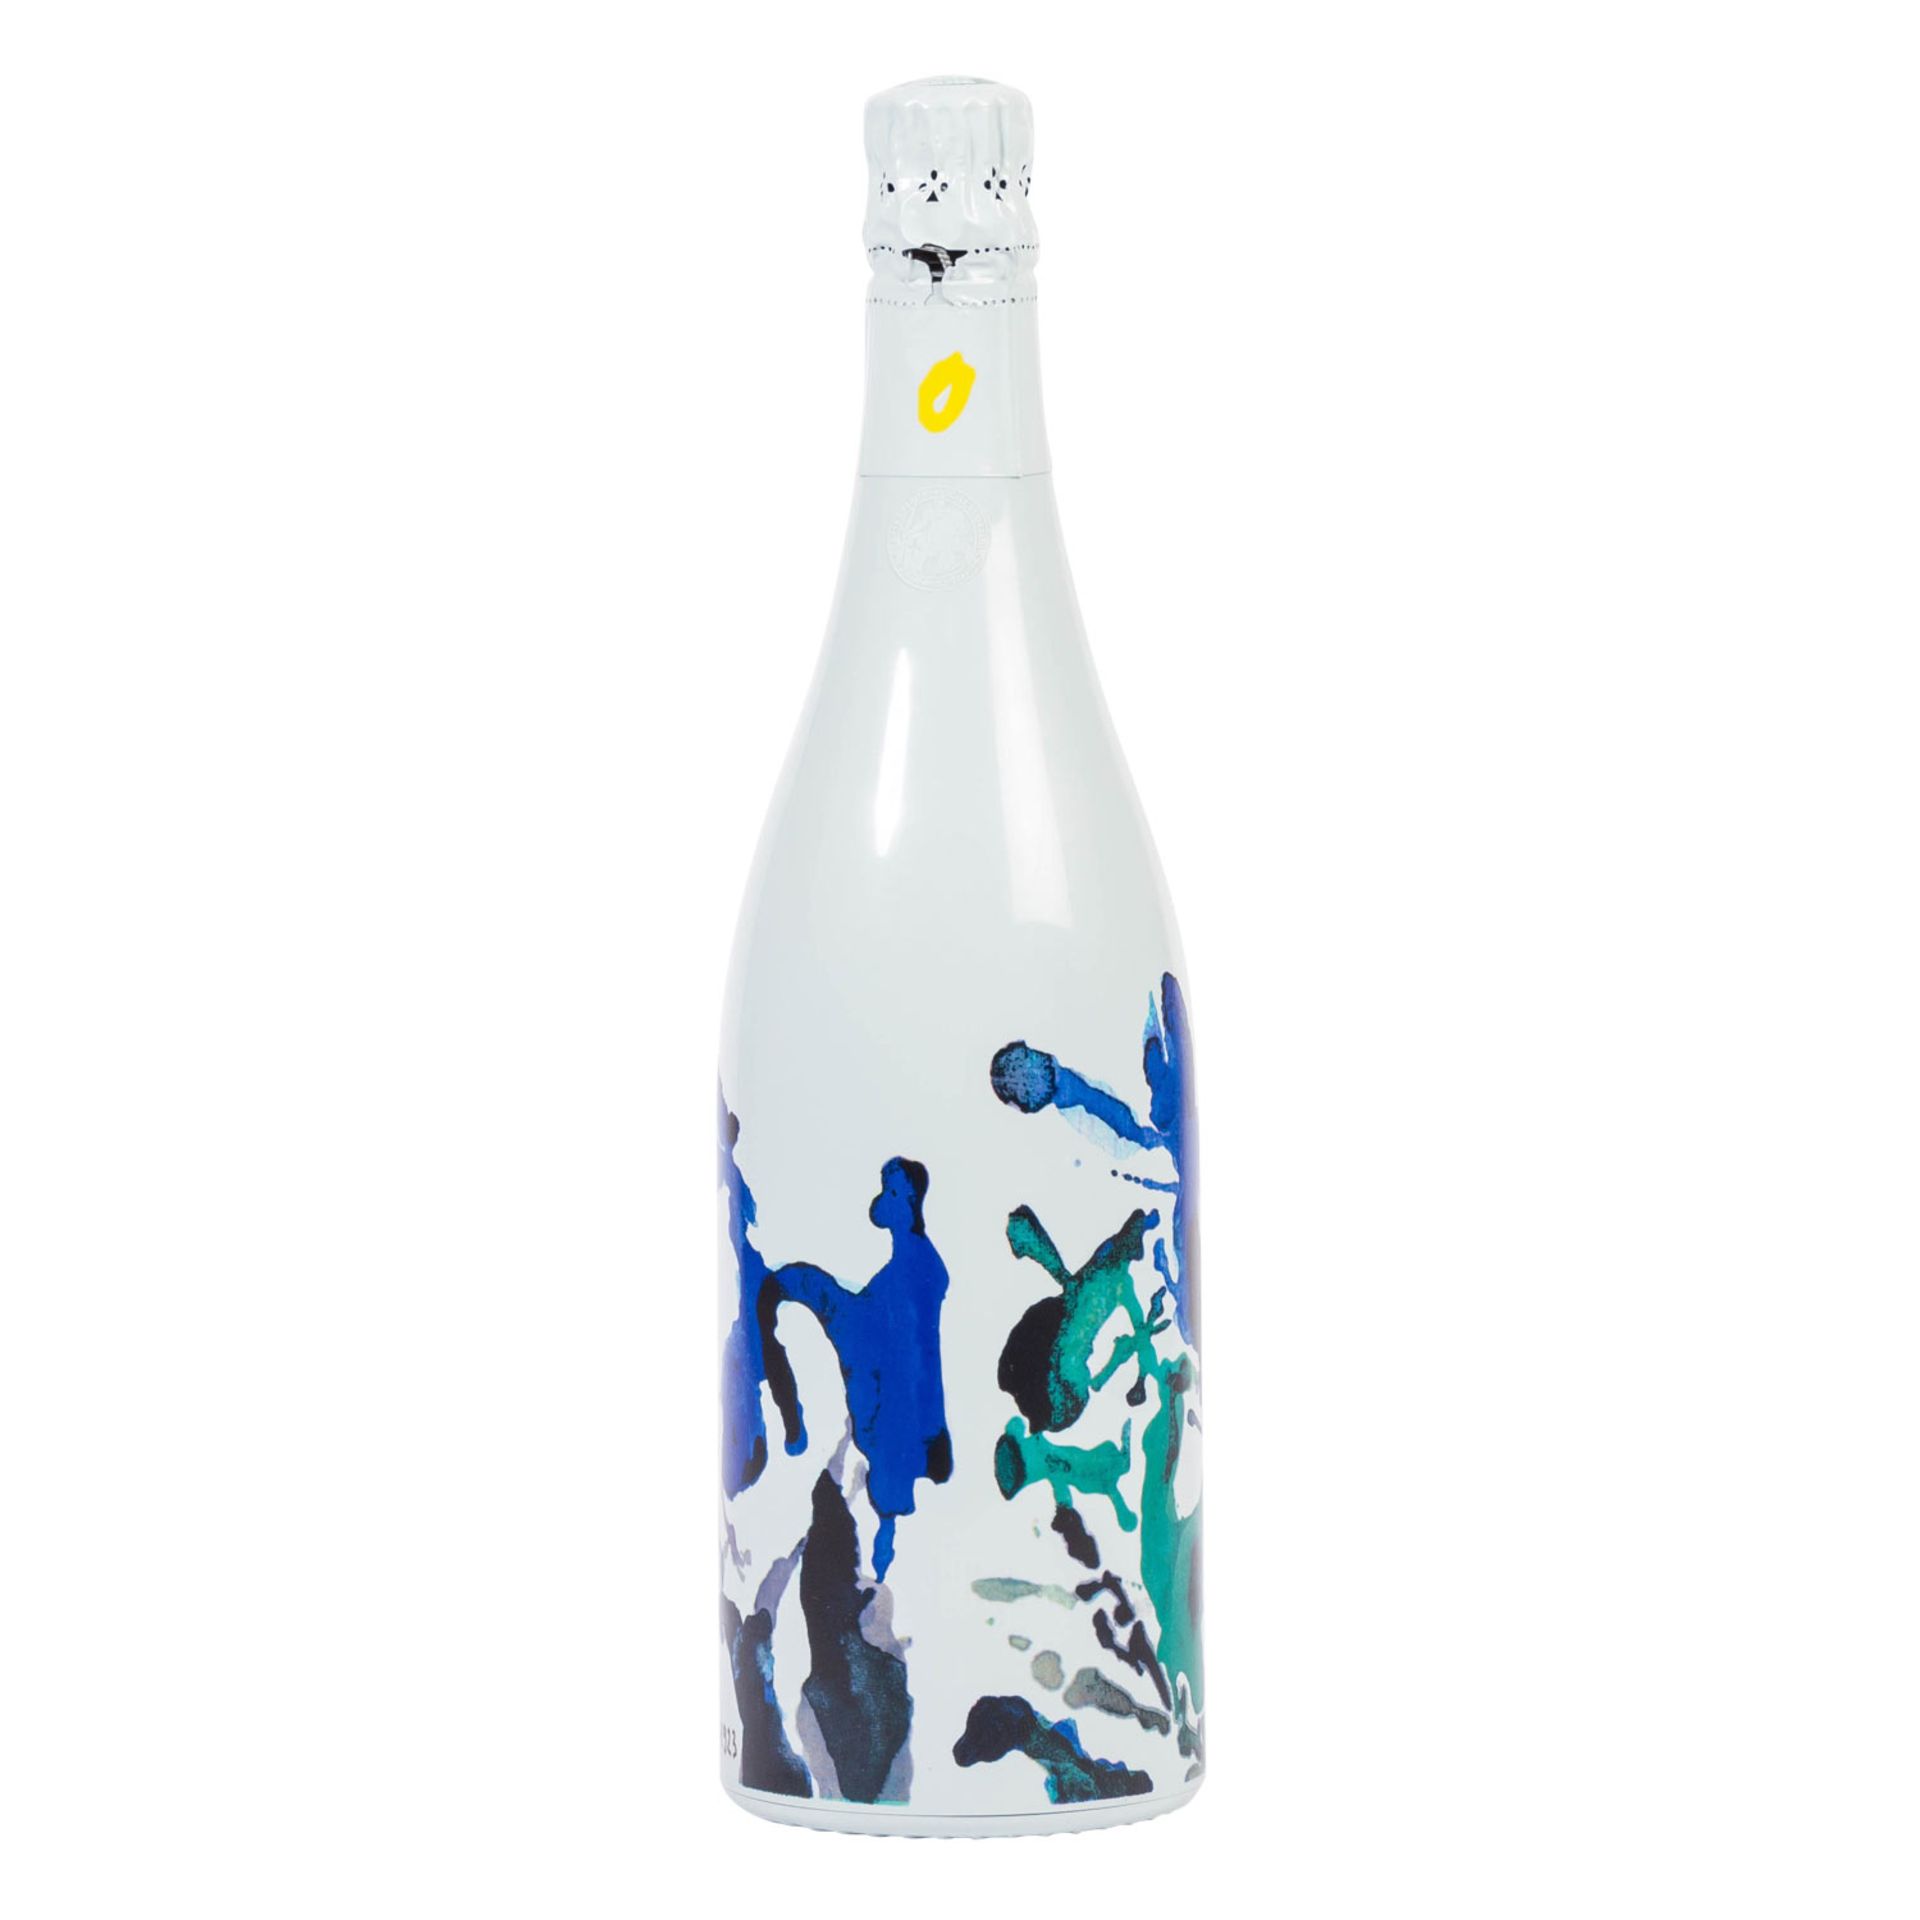 TAITTINGER Champagner 'Collection' 1 Flasche 'Zao Wou-Ki' 1998 - Image 2 of 5